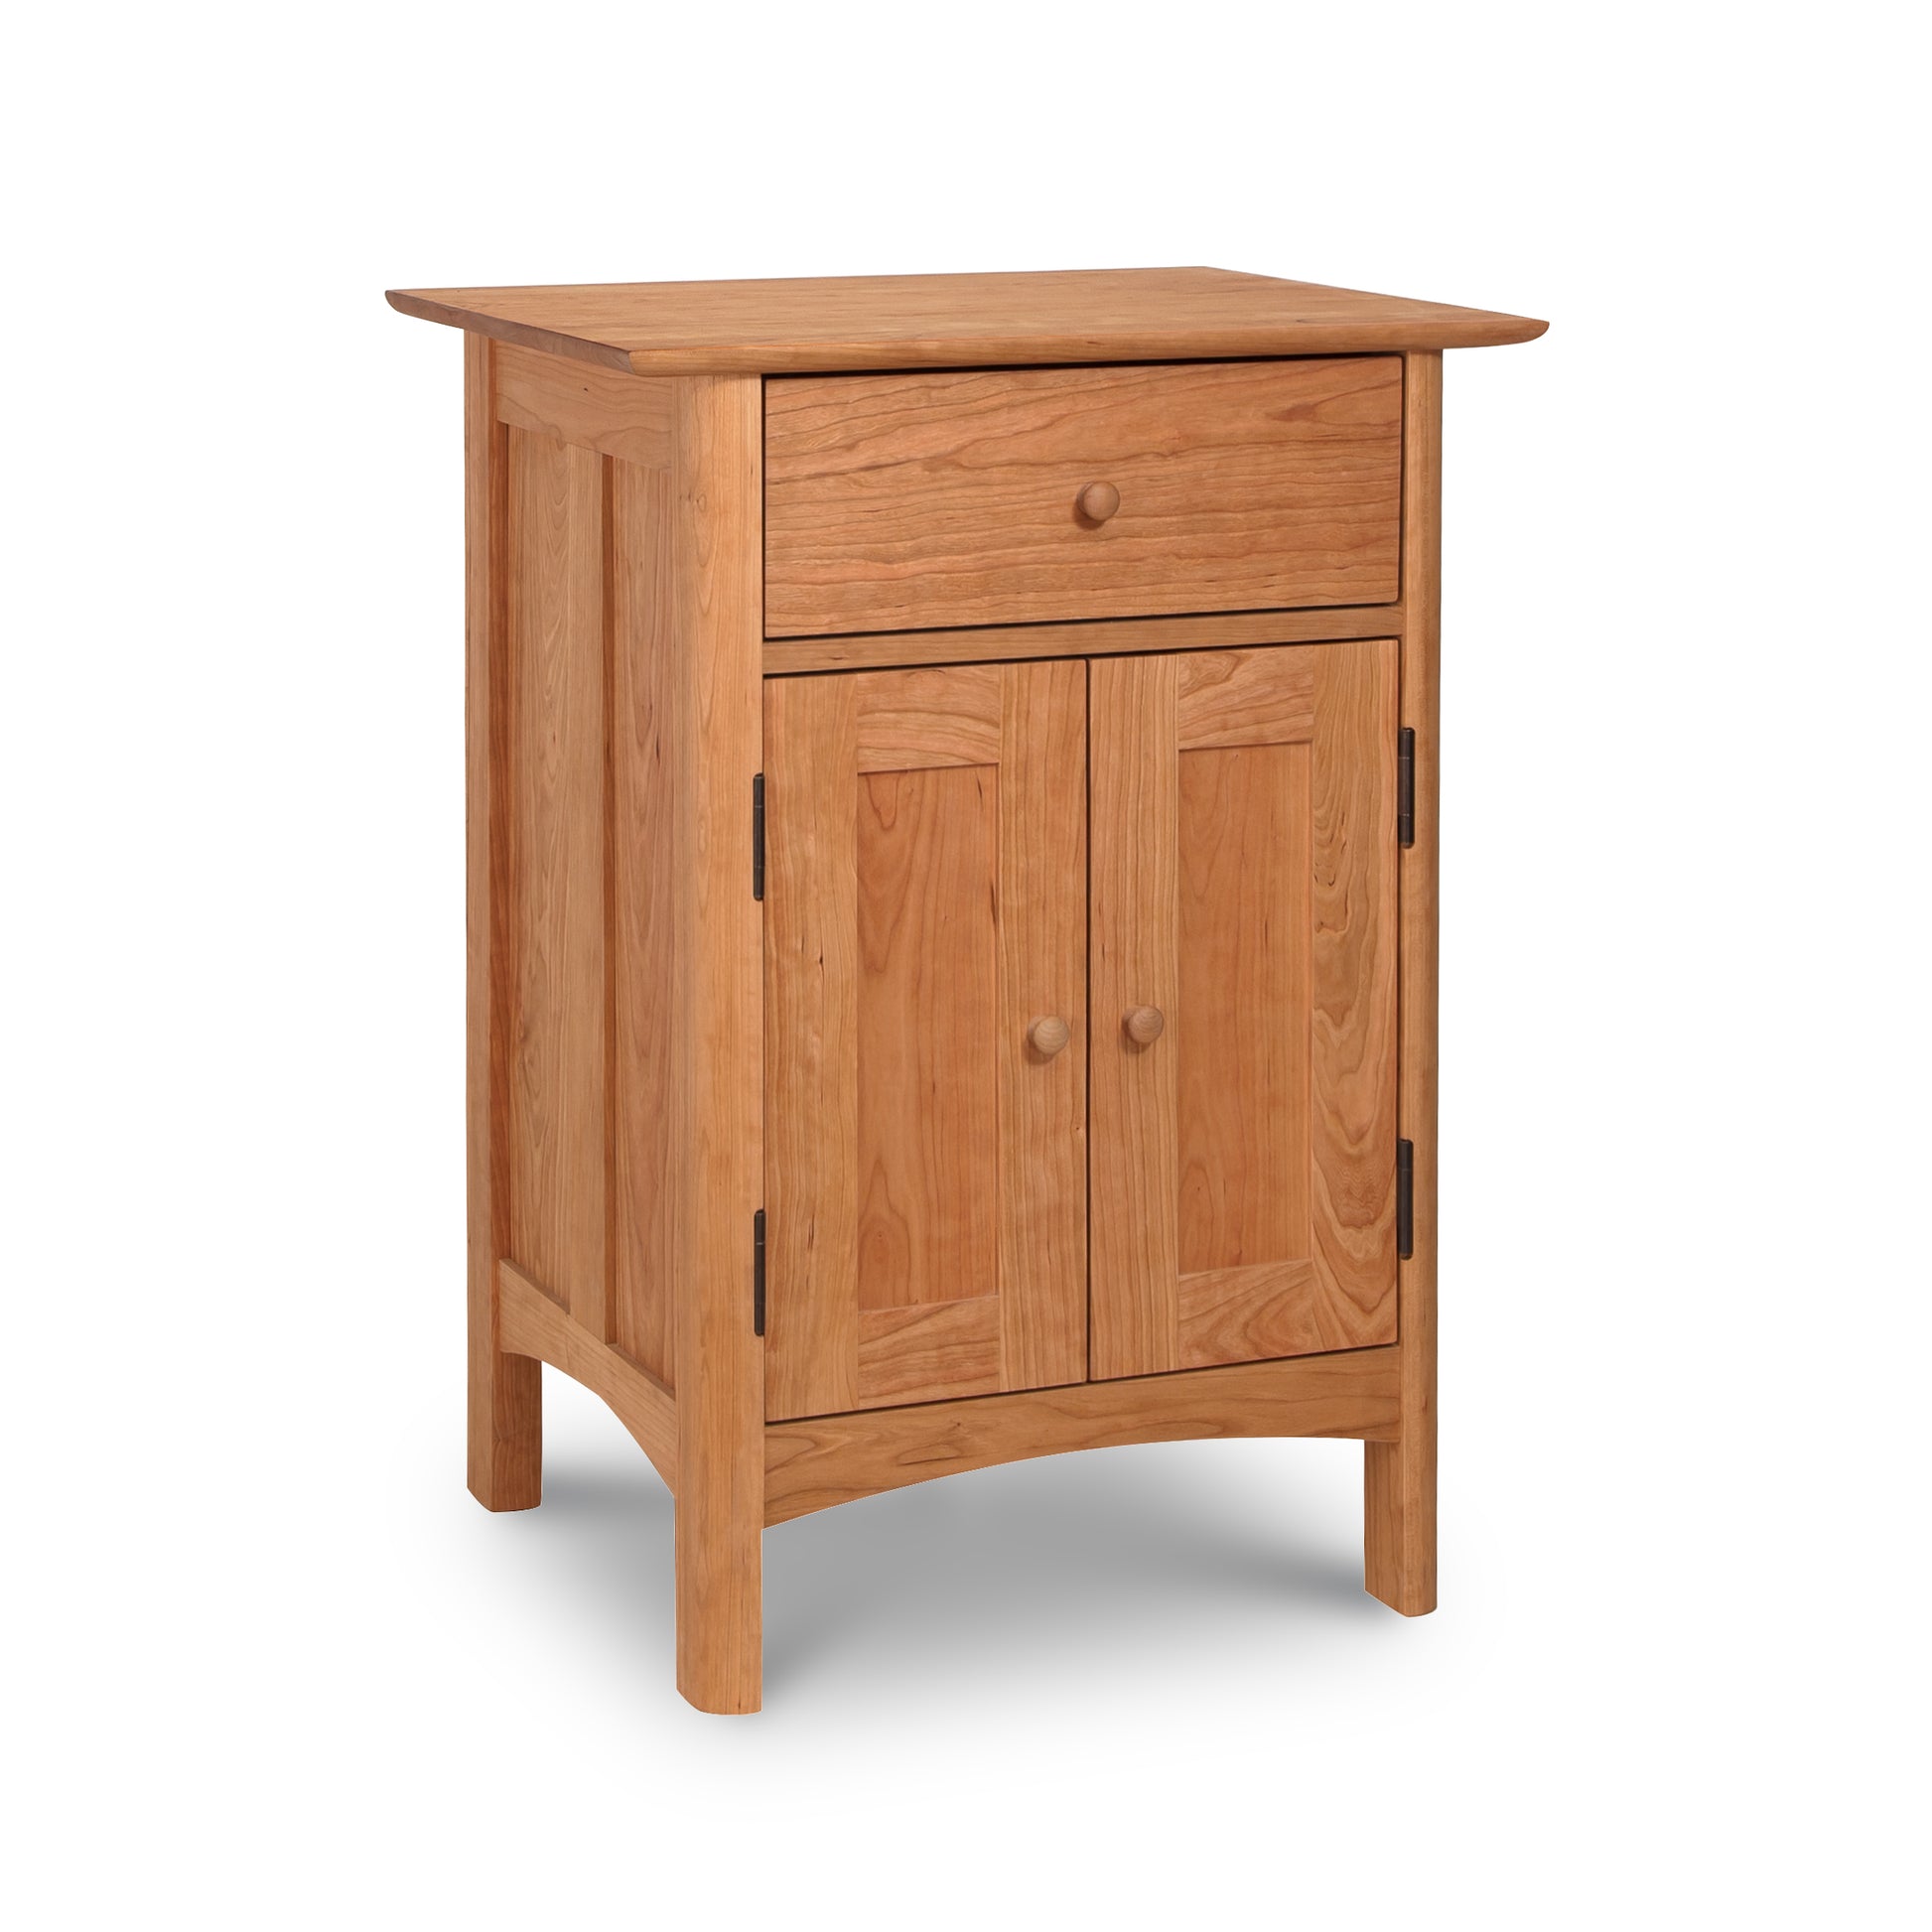 A Heartwood Shaker Short Storage Chest from Vermont Furniture Designs with one drawer and two doors on a white background.